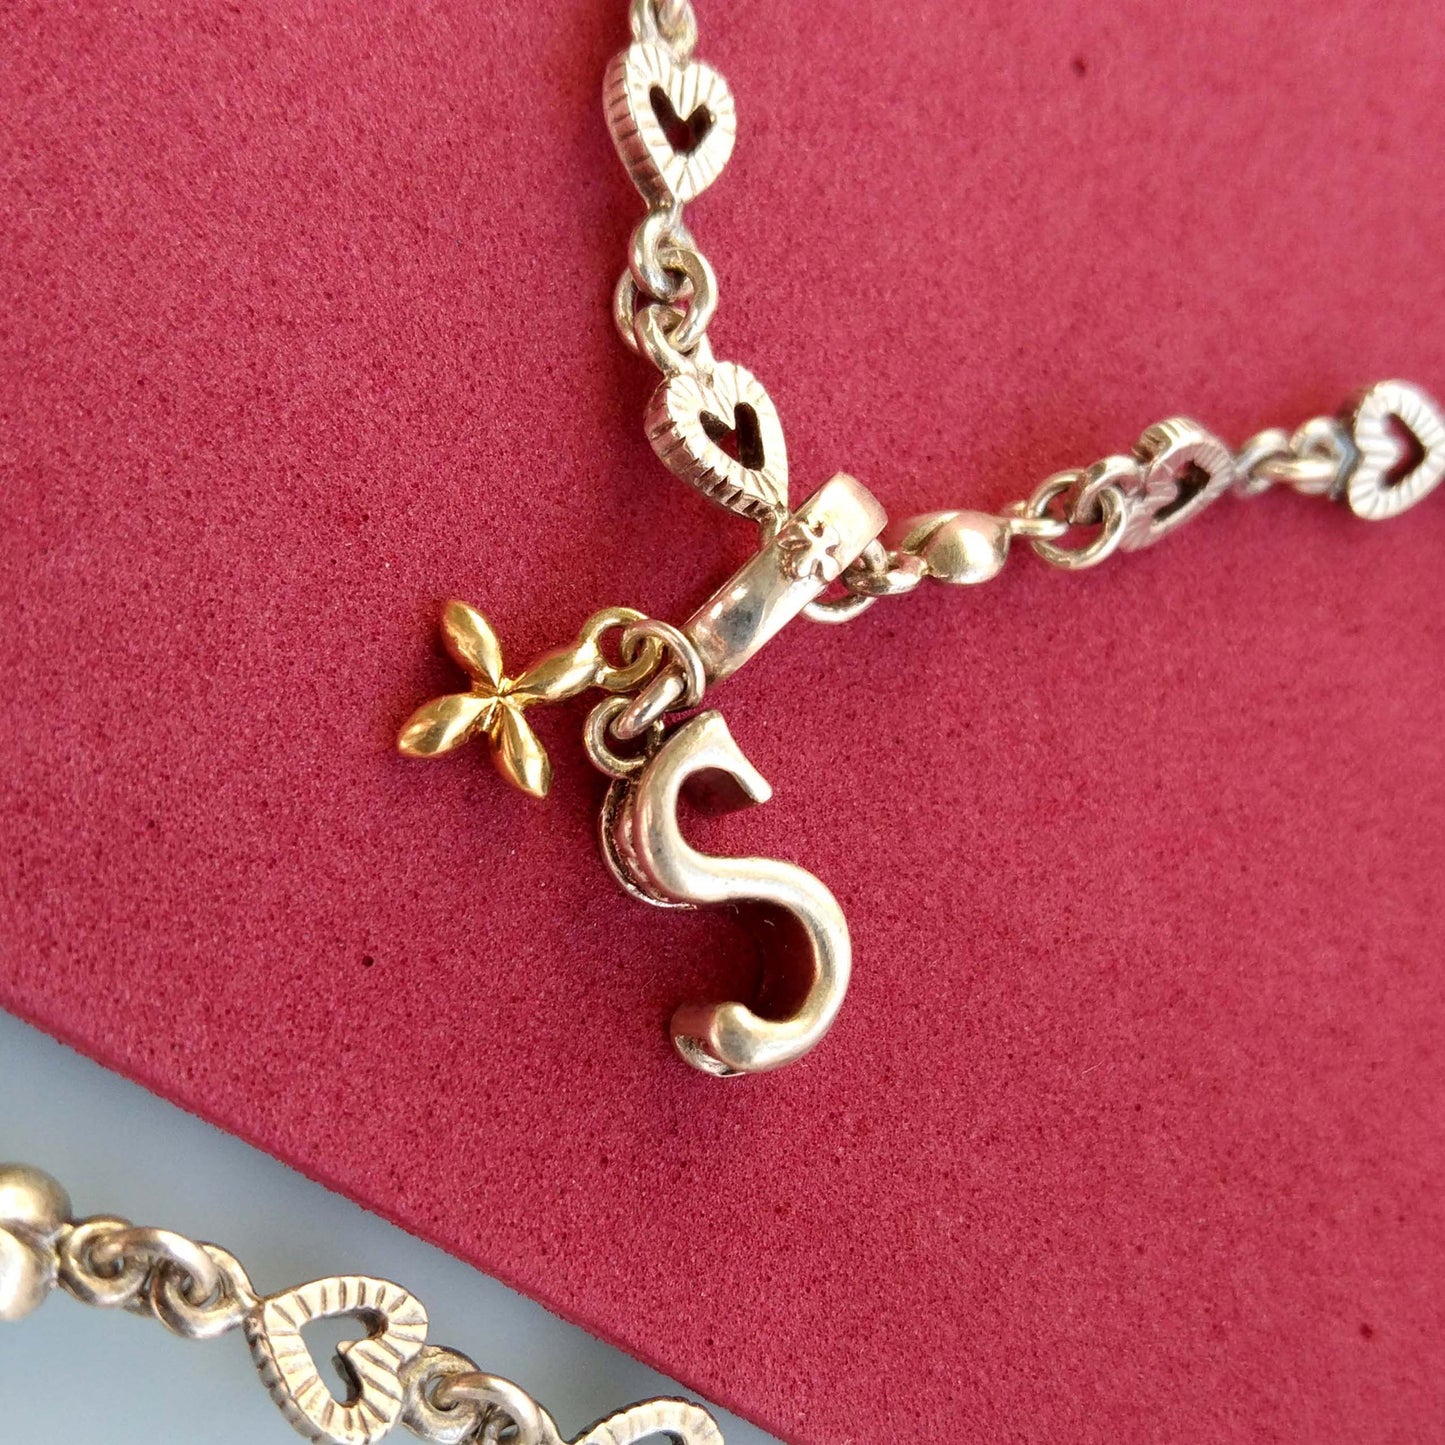 18K Gold Cross and Letter S Charm Loree Rodkin Necklace in Sterling Silver 